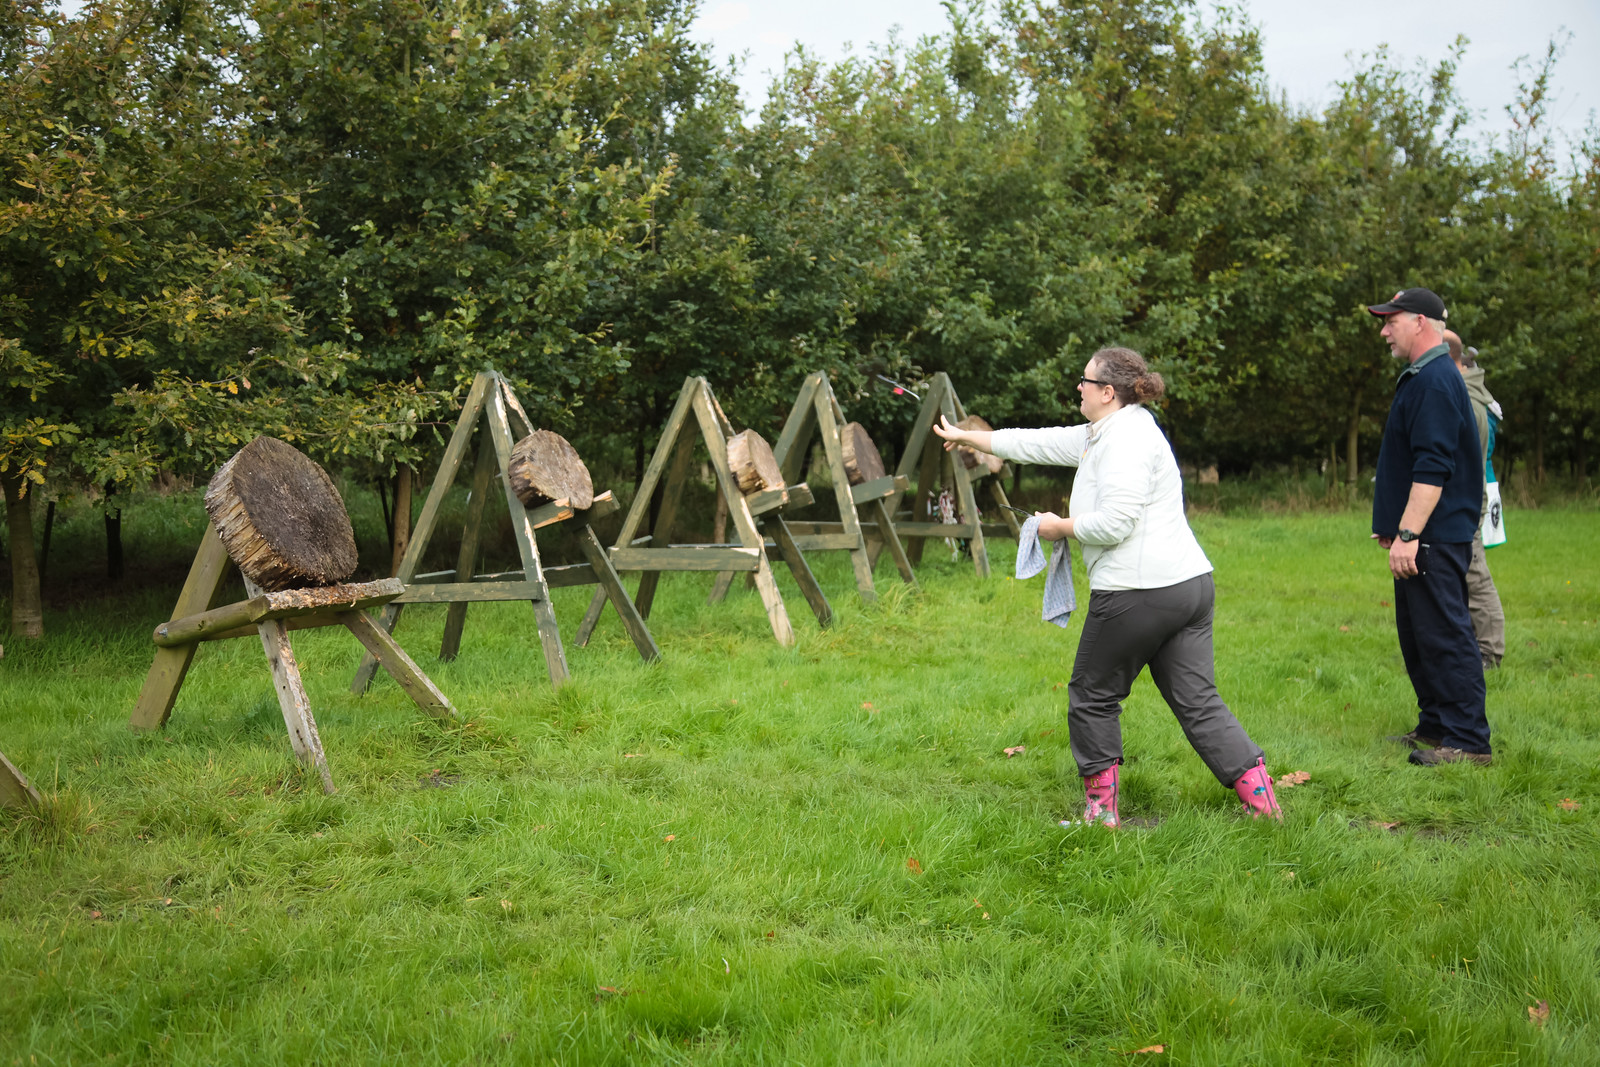 Tomahawk Throwing Course - 25th September 2021